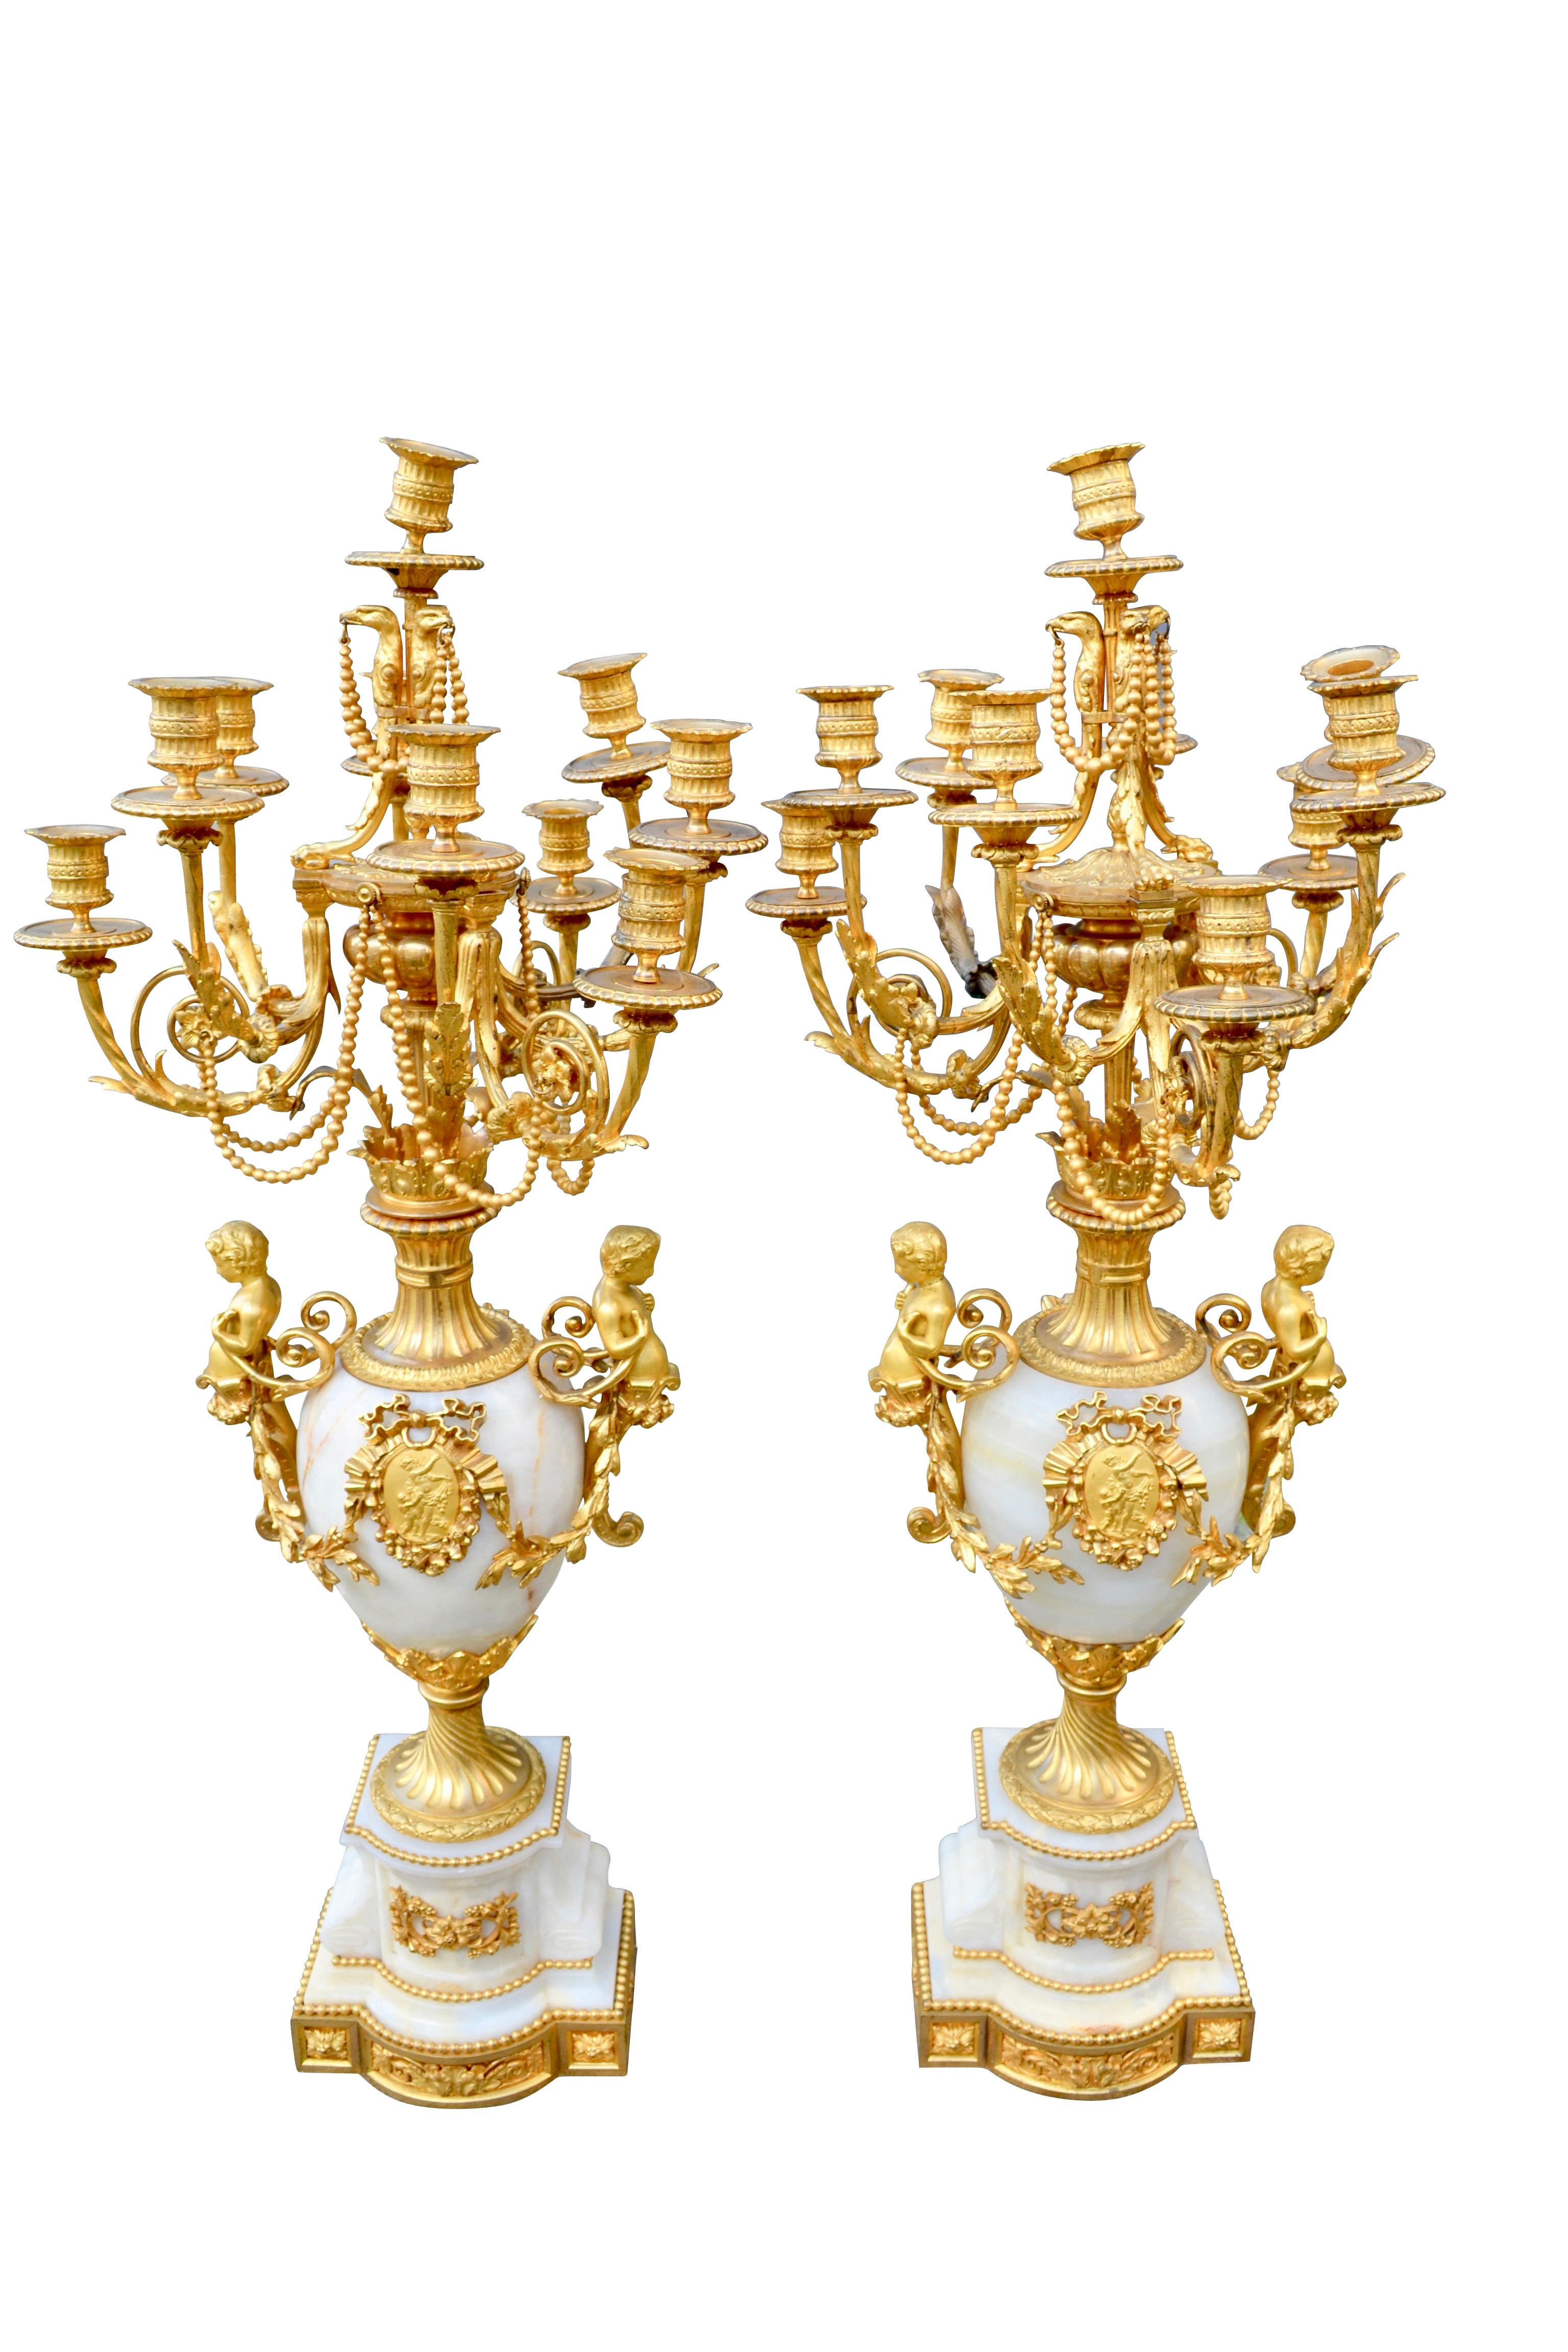 19th Century Palatial Scale Onyx and Gilt Bronze Napoleon III Candelabra For Sale